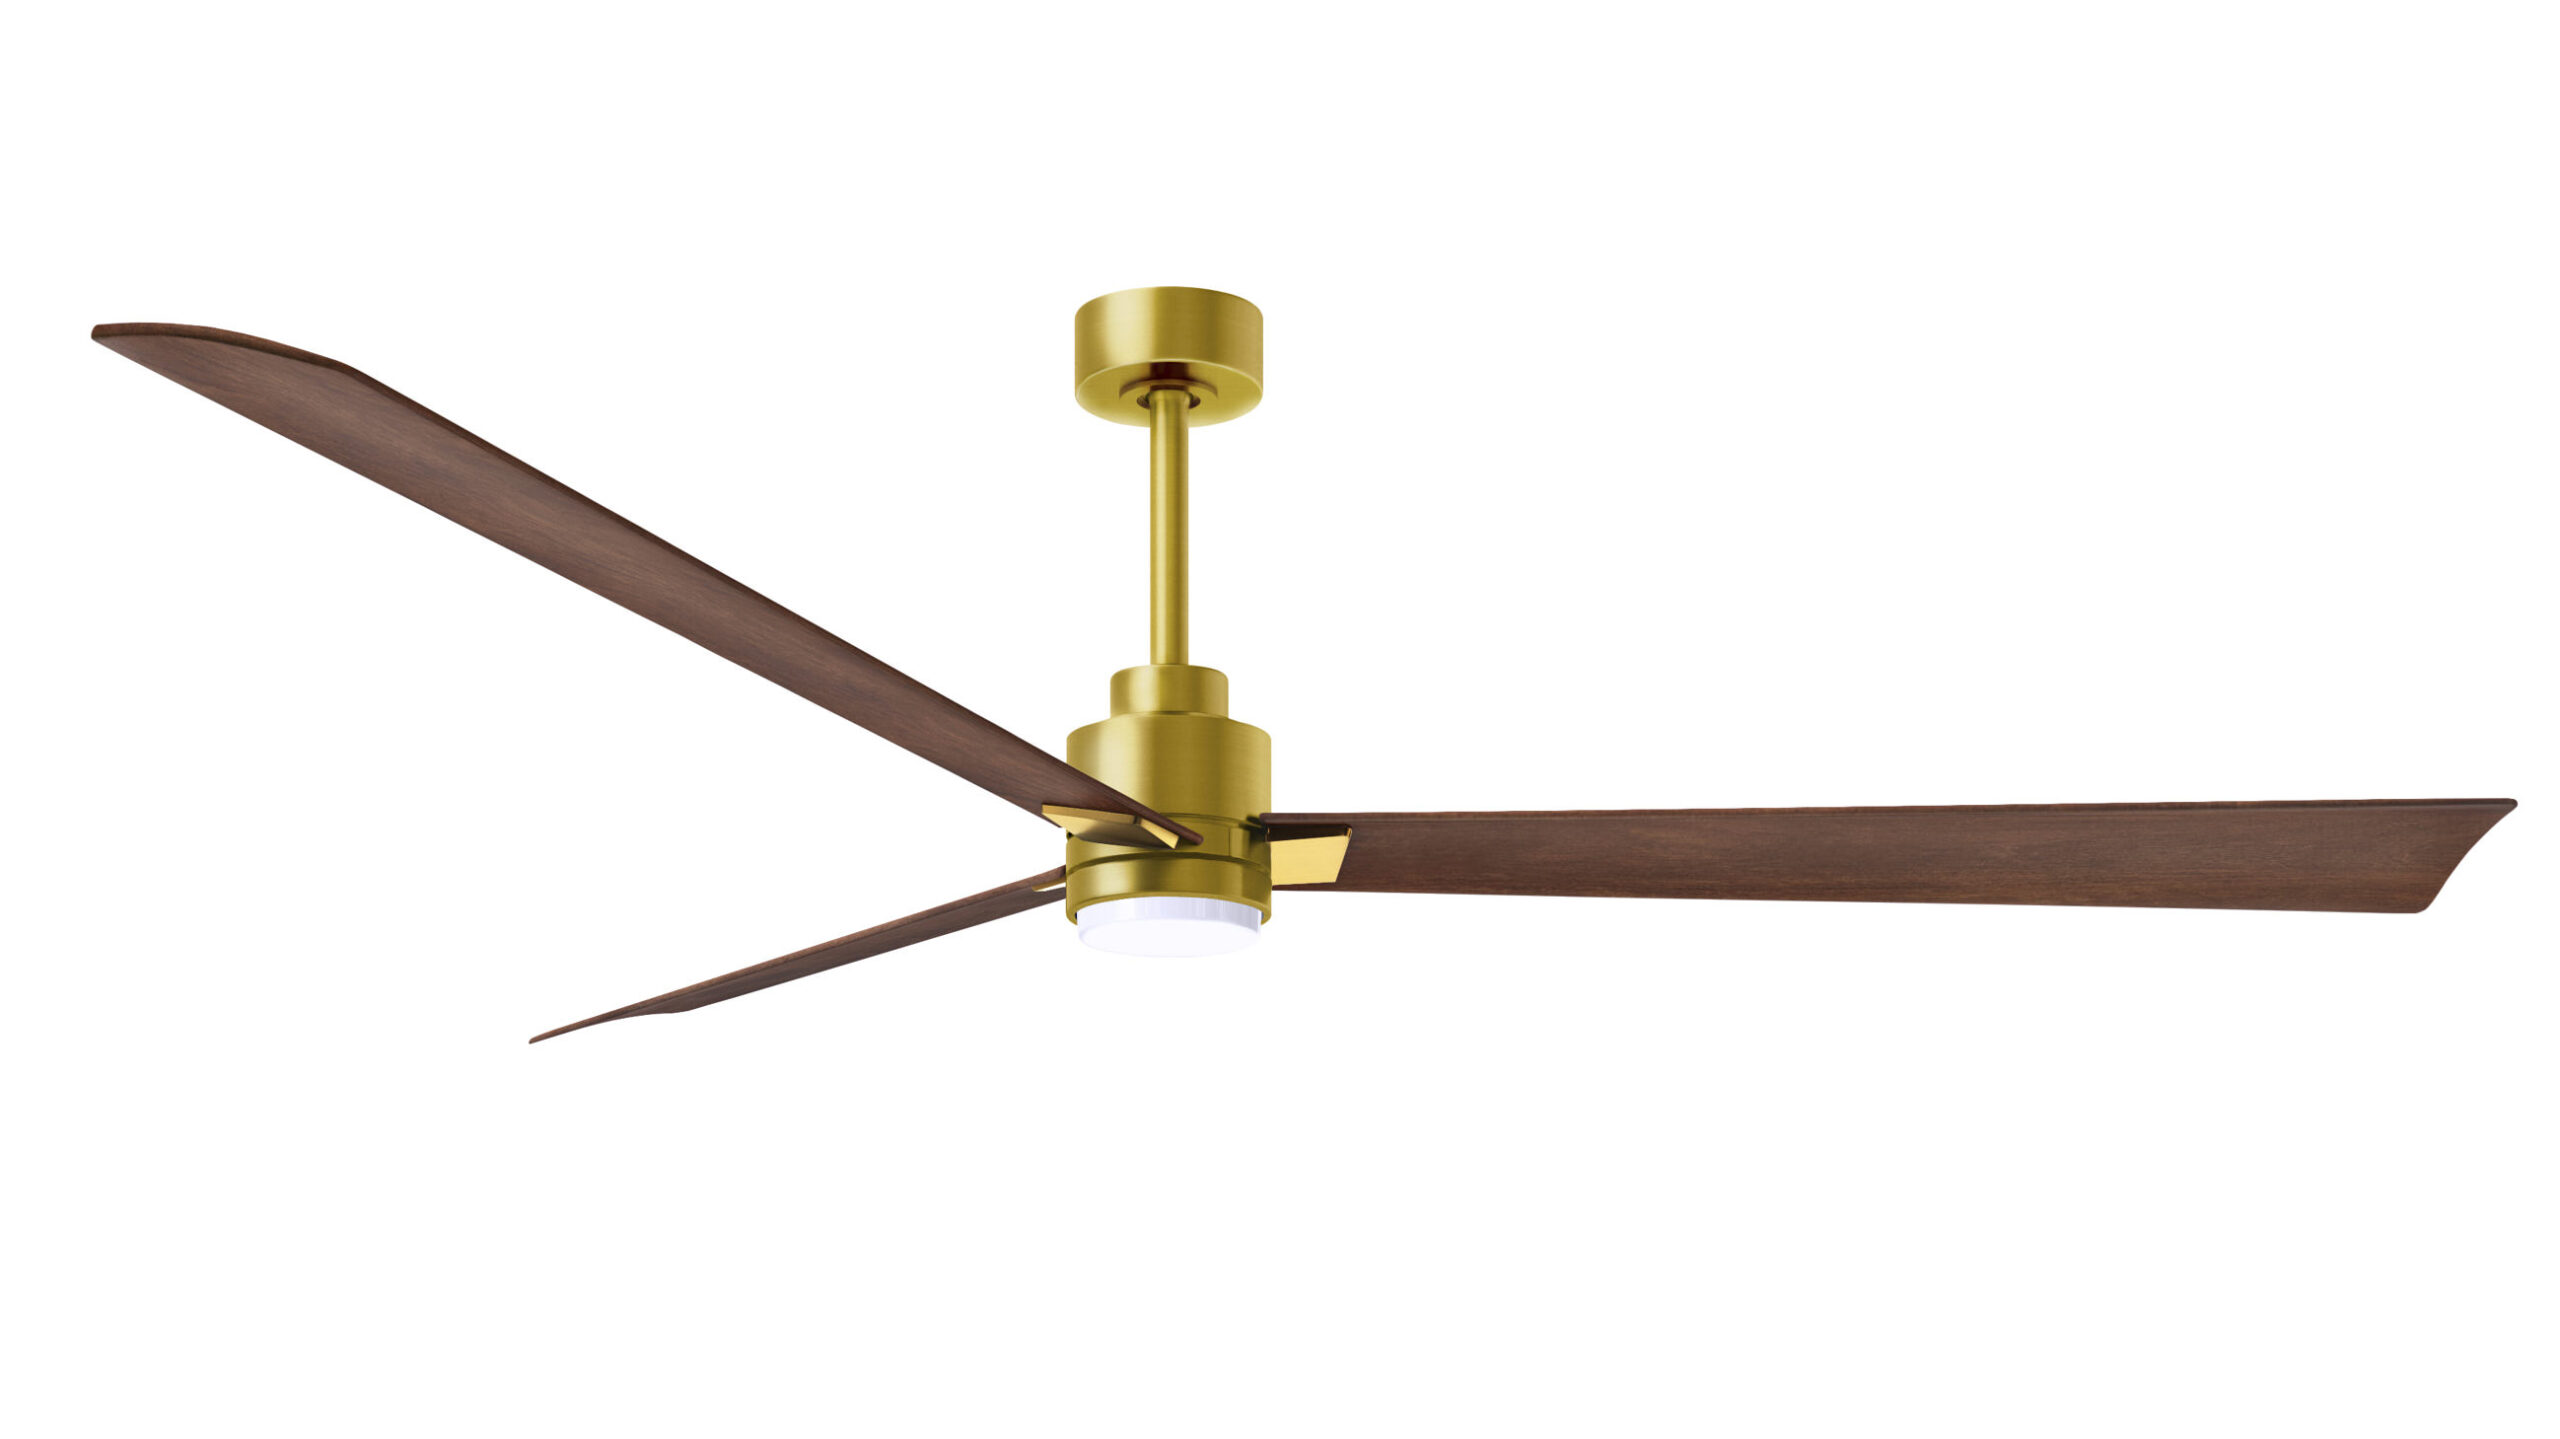 Alessandra-LK ceiling fan in brushed brass finish with 72